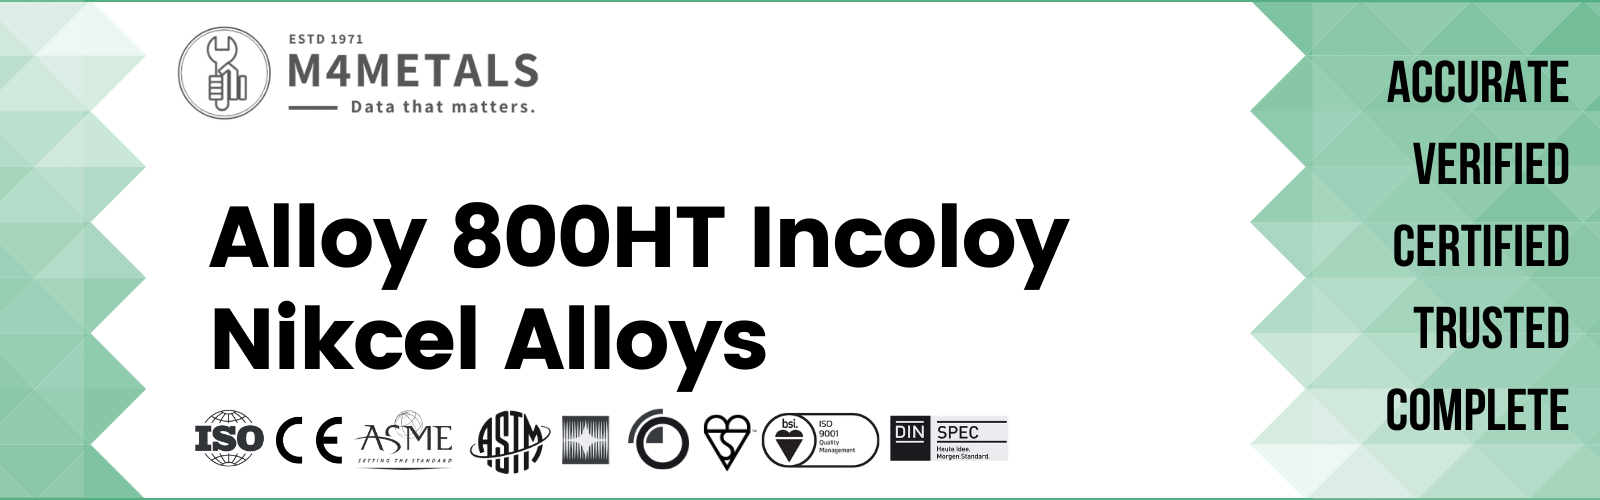 Incoloy Alloy 800HT